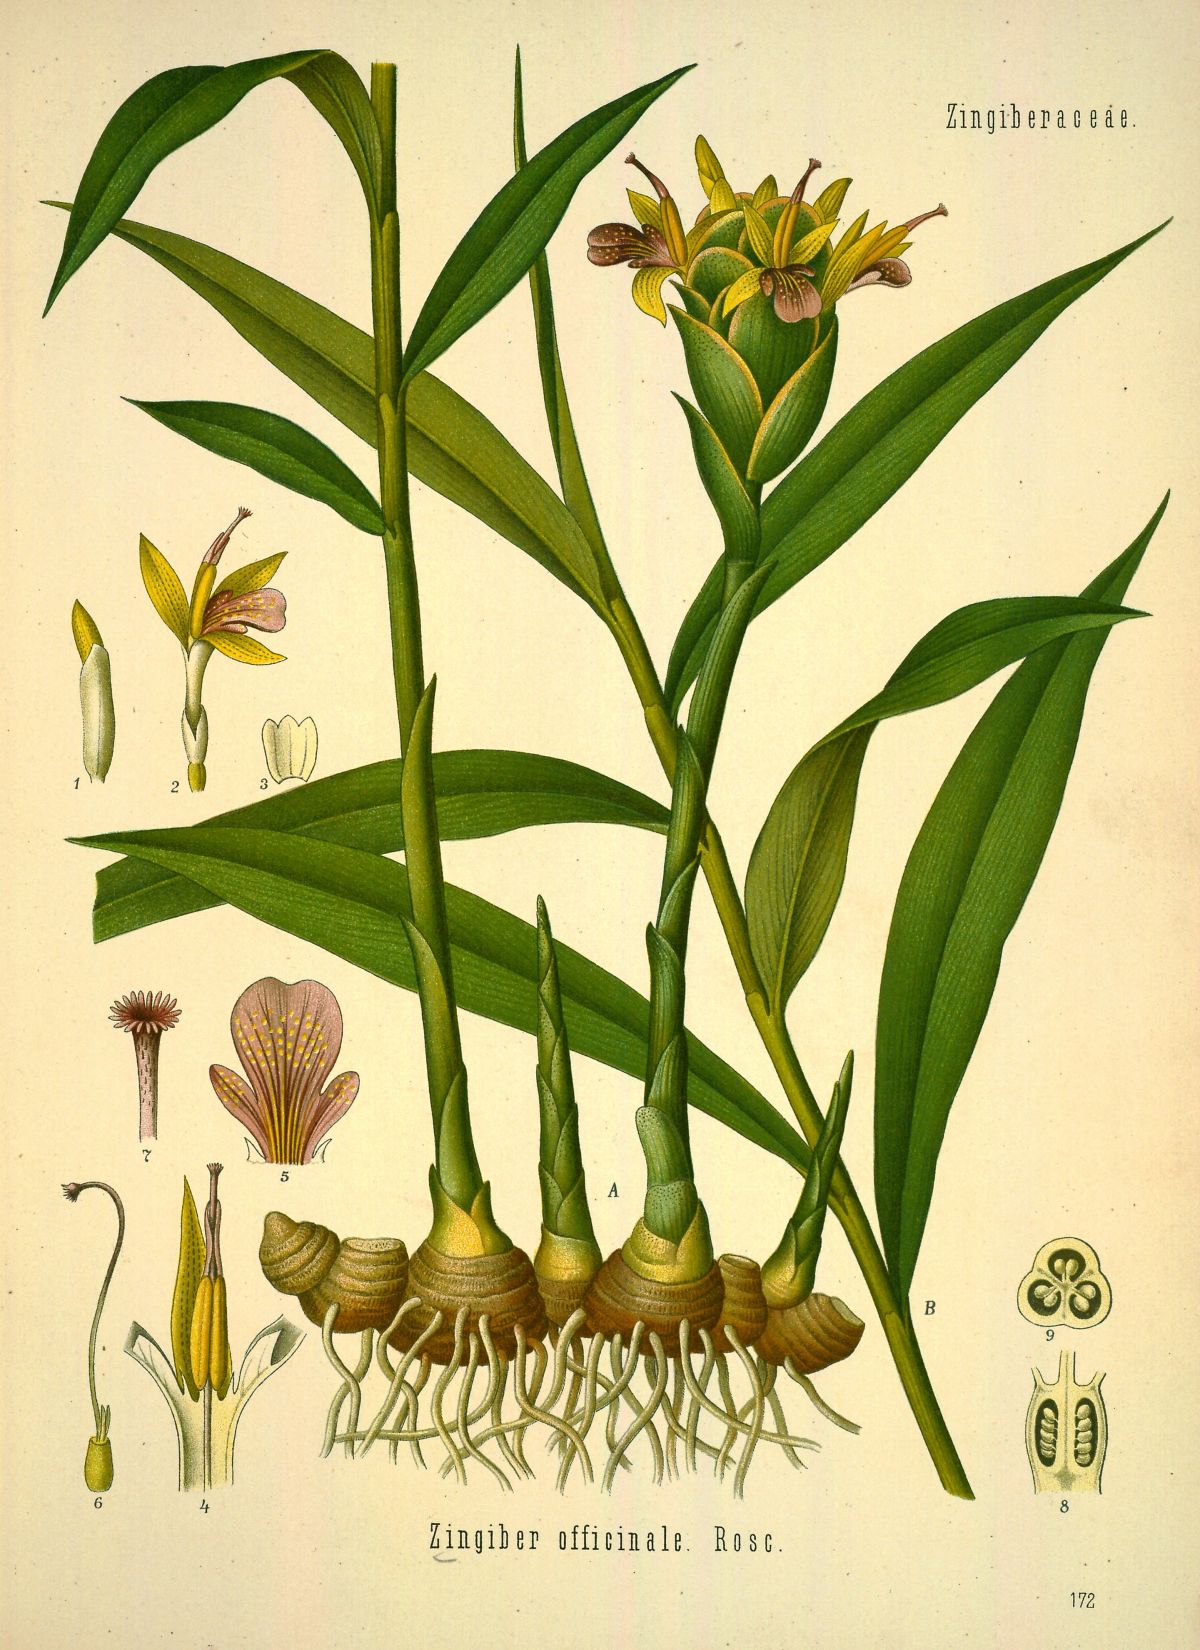 http://www.plantillustrations.org/illustration.php?id_illustration=31440&id_taxon=11465&mobile=0&SID=1p9je4or8qfosc56jud44ssgal&language=Engish&thumbnails_selectable=0&selected_thumbnail=0&query_type=genus&query_broad_or_restricted=broad&group=0&lay_out=0&uhd=2